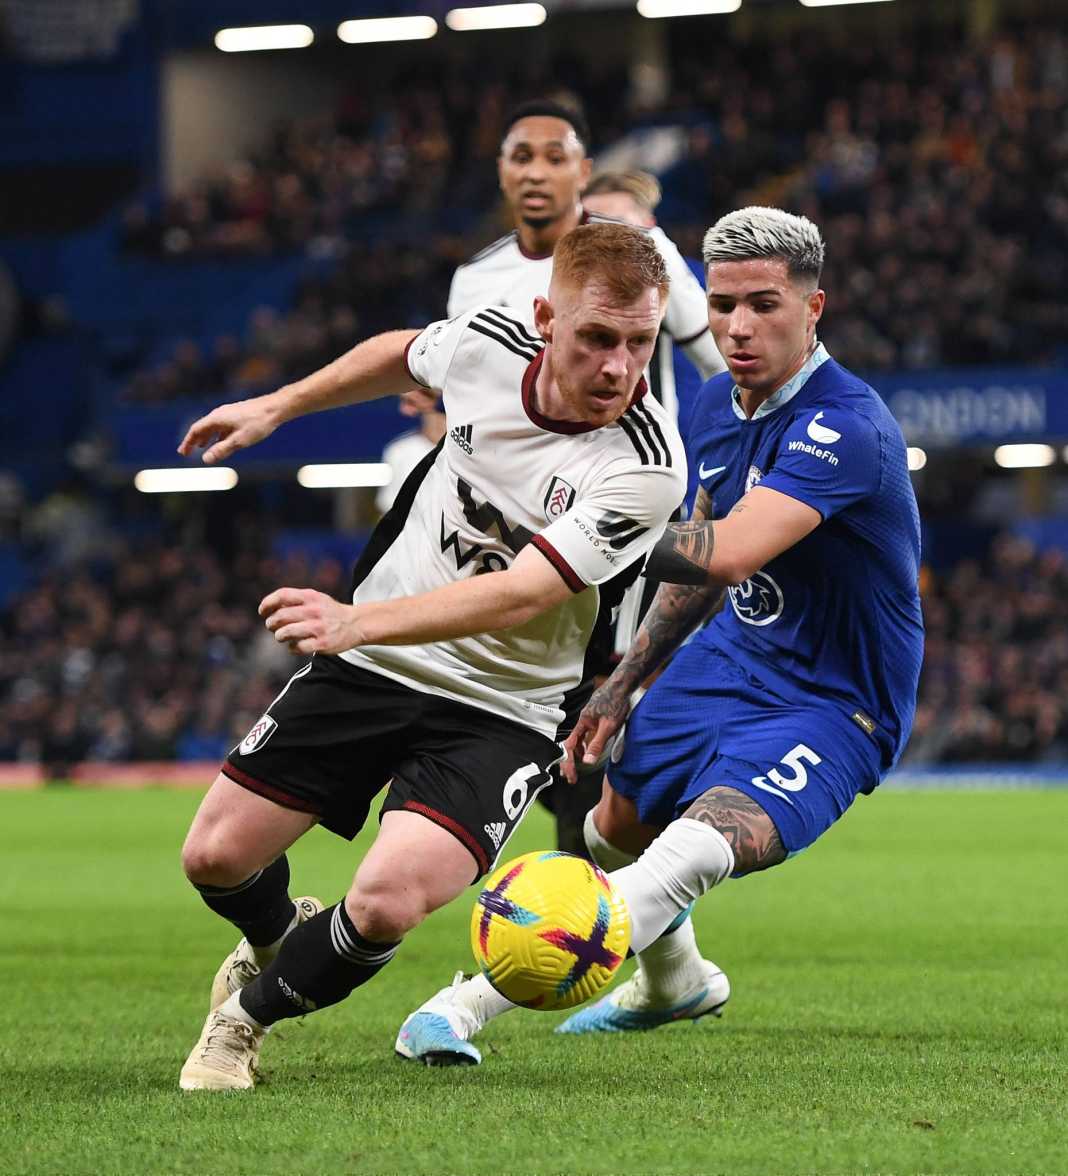 Chelsea and Fulham players battling